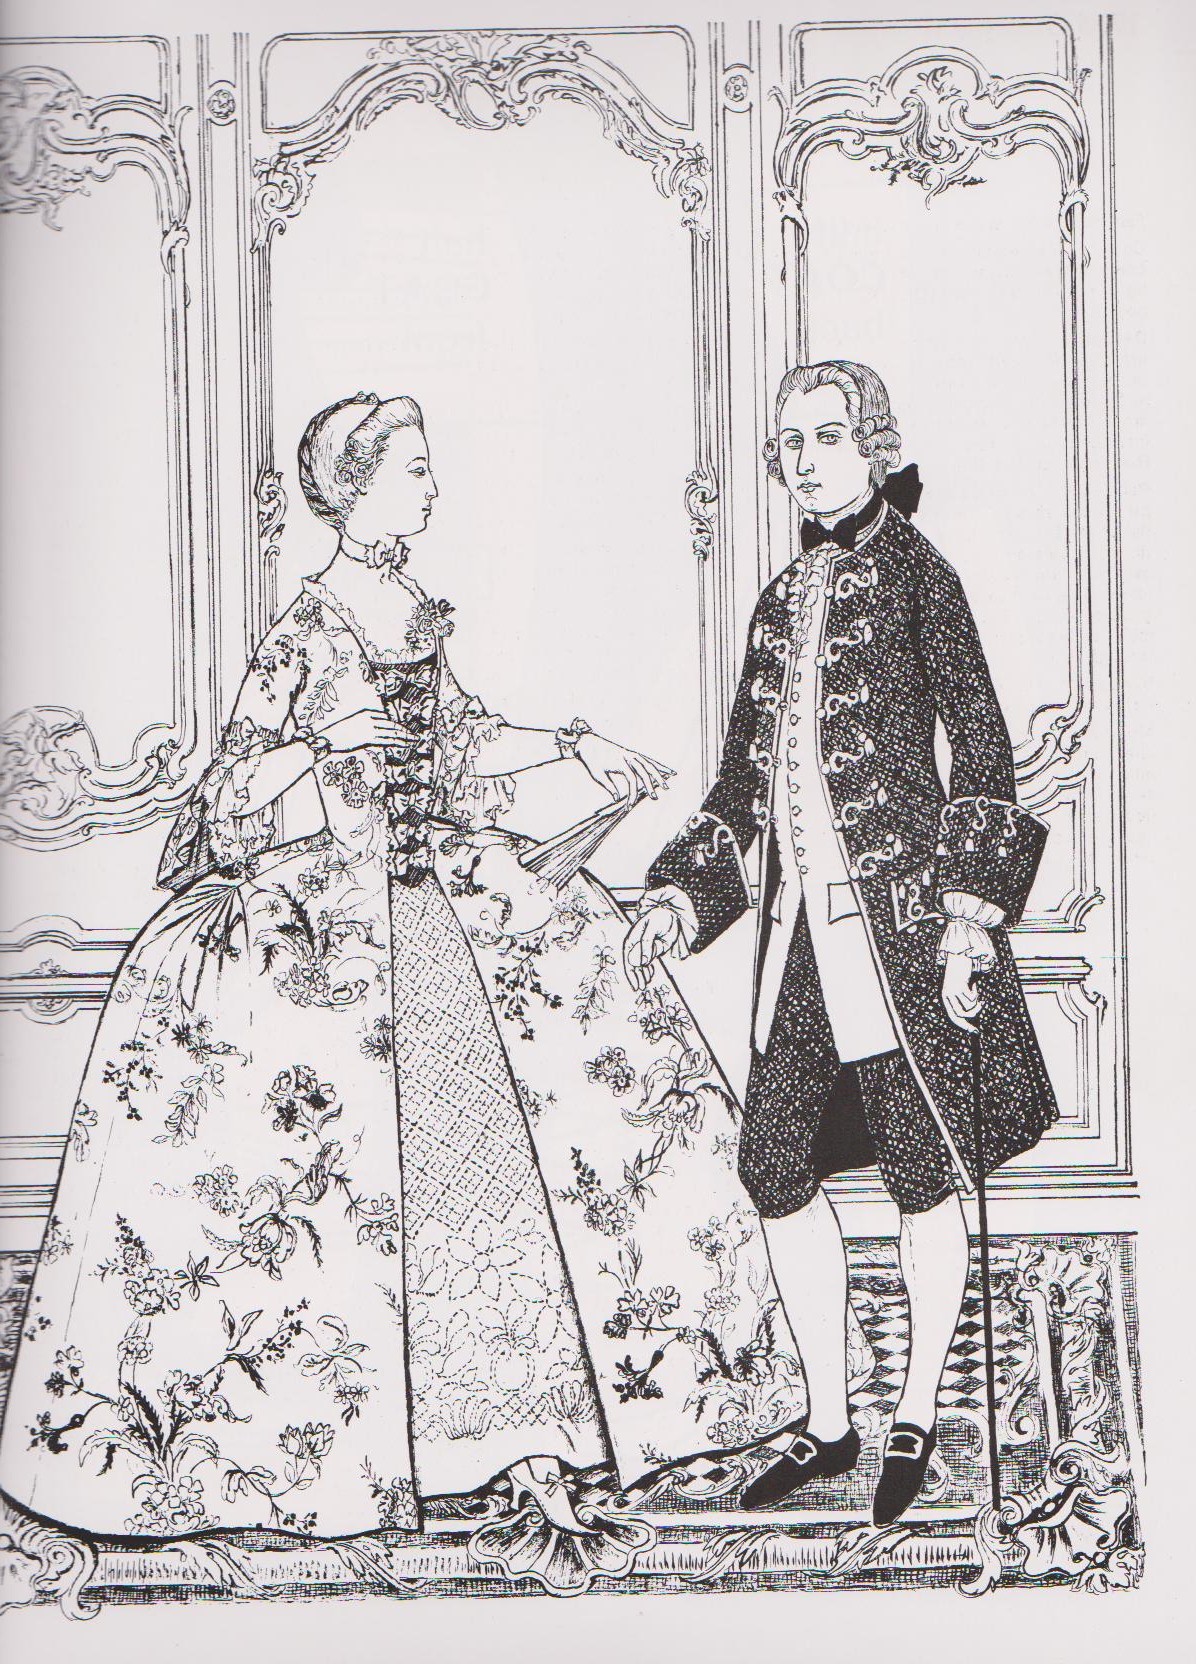 Evolution Of Fashion - Margot Hill and Peter.A. Bucknell - Eighteenth century costume - Details of Goergian Clothing - Fashion throughout the ages - Researching 1700's Fashion - Side Hoop Dresses - Robe a la Francais - Robe a la anglais - upper class clothing - Court wear - patterns of historical clothing - historical costume -HandBound Costumes - 